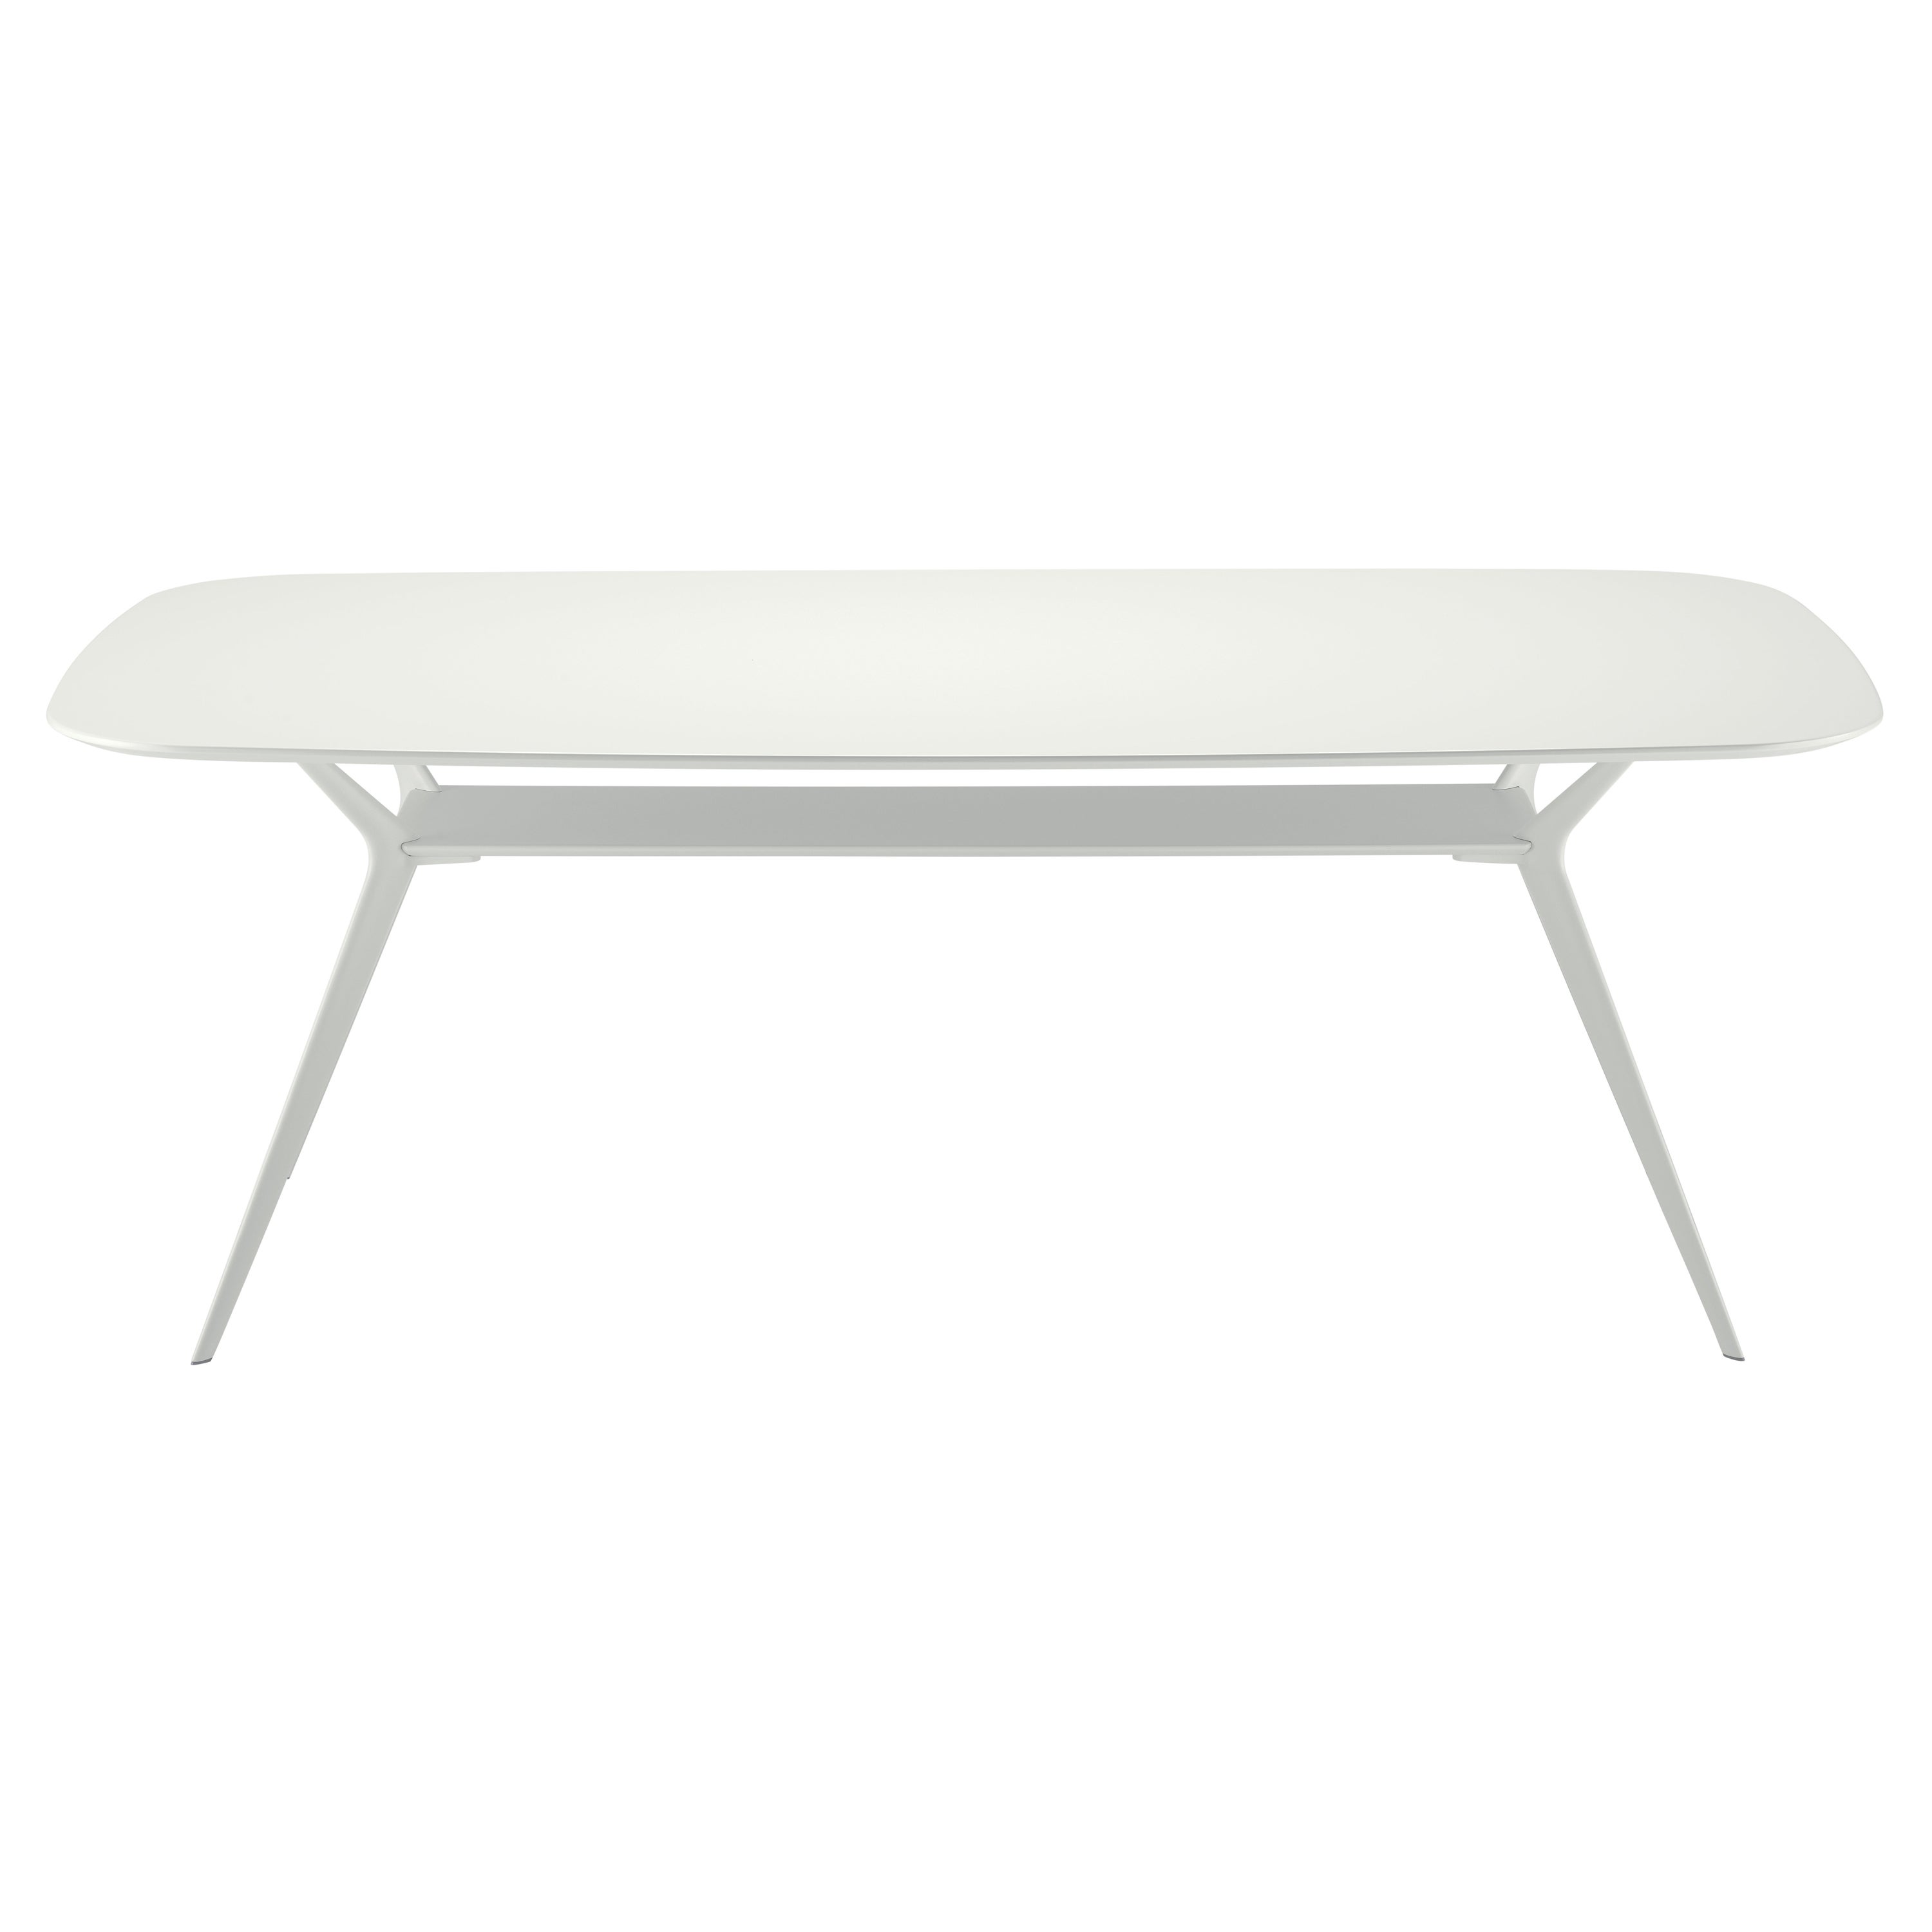 Alias Biplane 40D Table in White MDF Top with White Lacquered Aluminium Frame For Sale